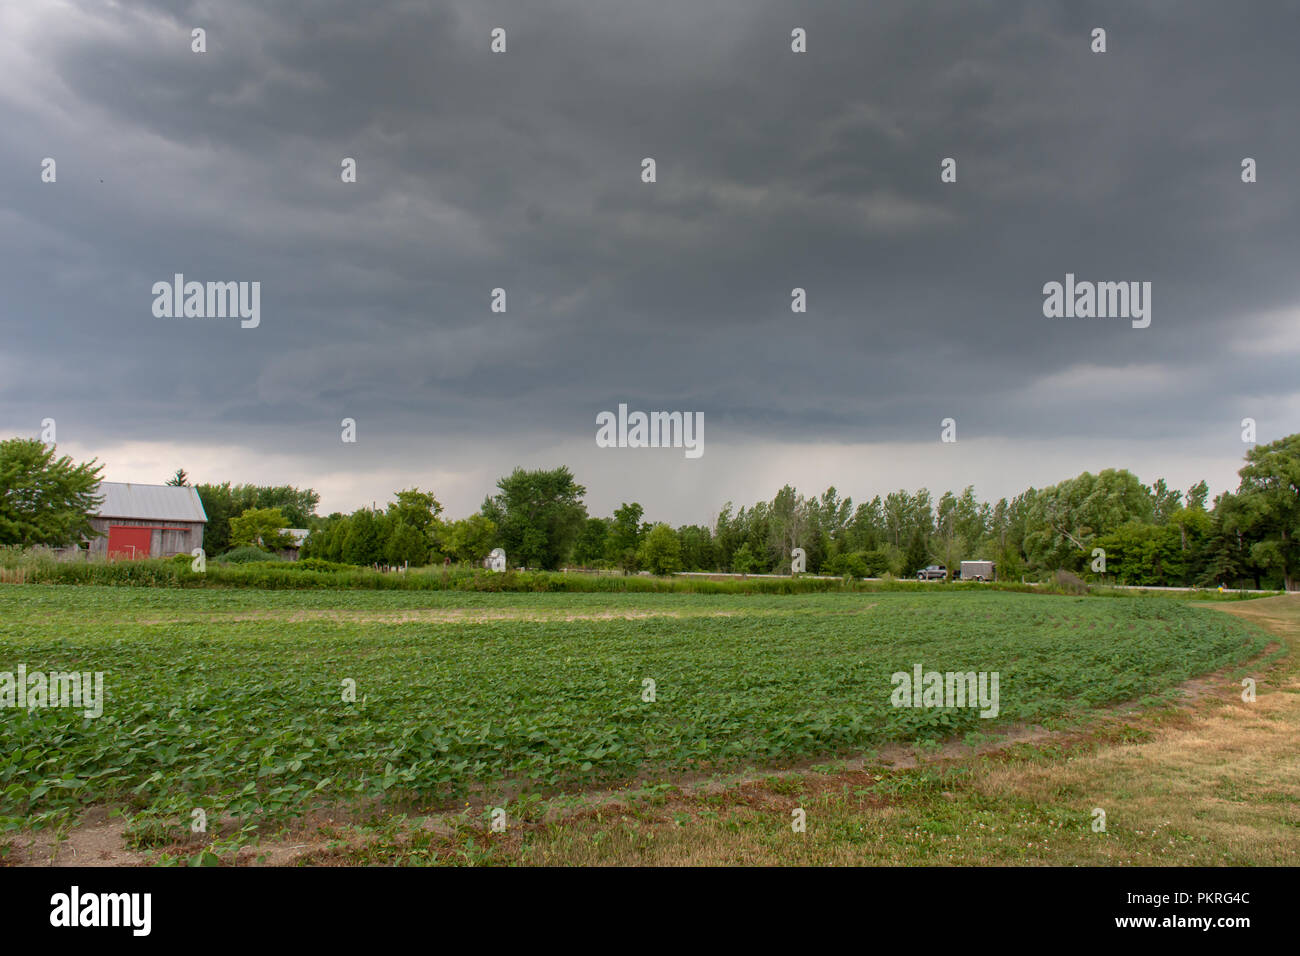 A storm rolls in over a Canadian farmland Stock Photo